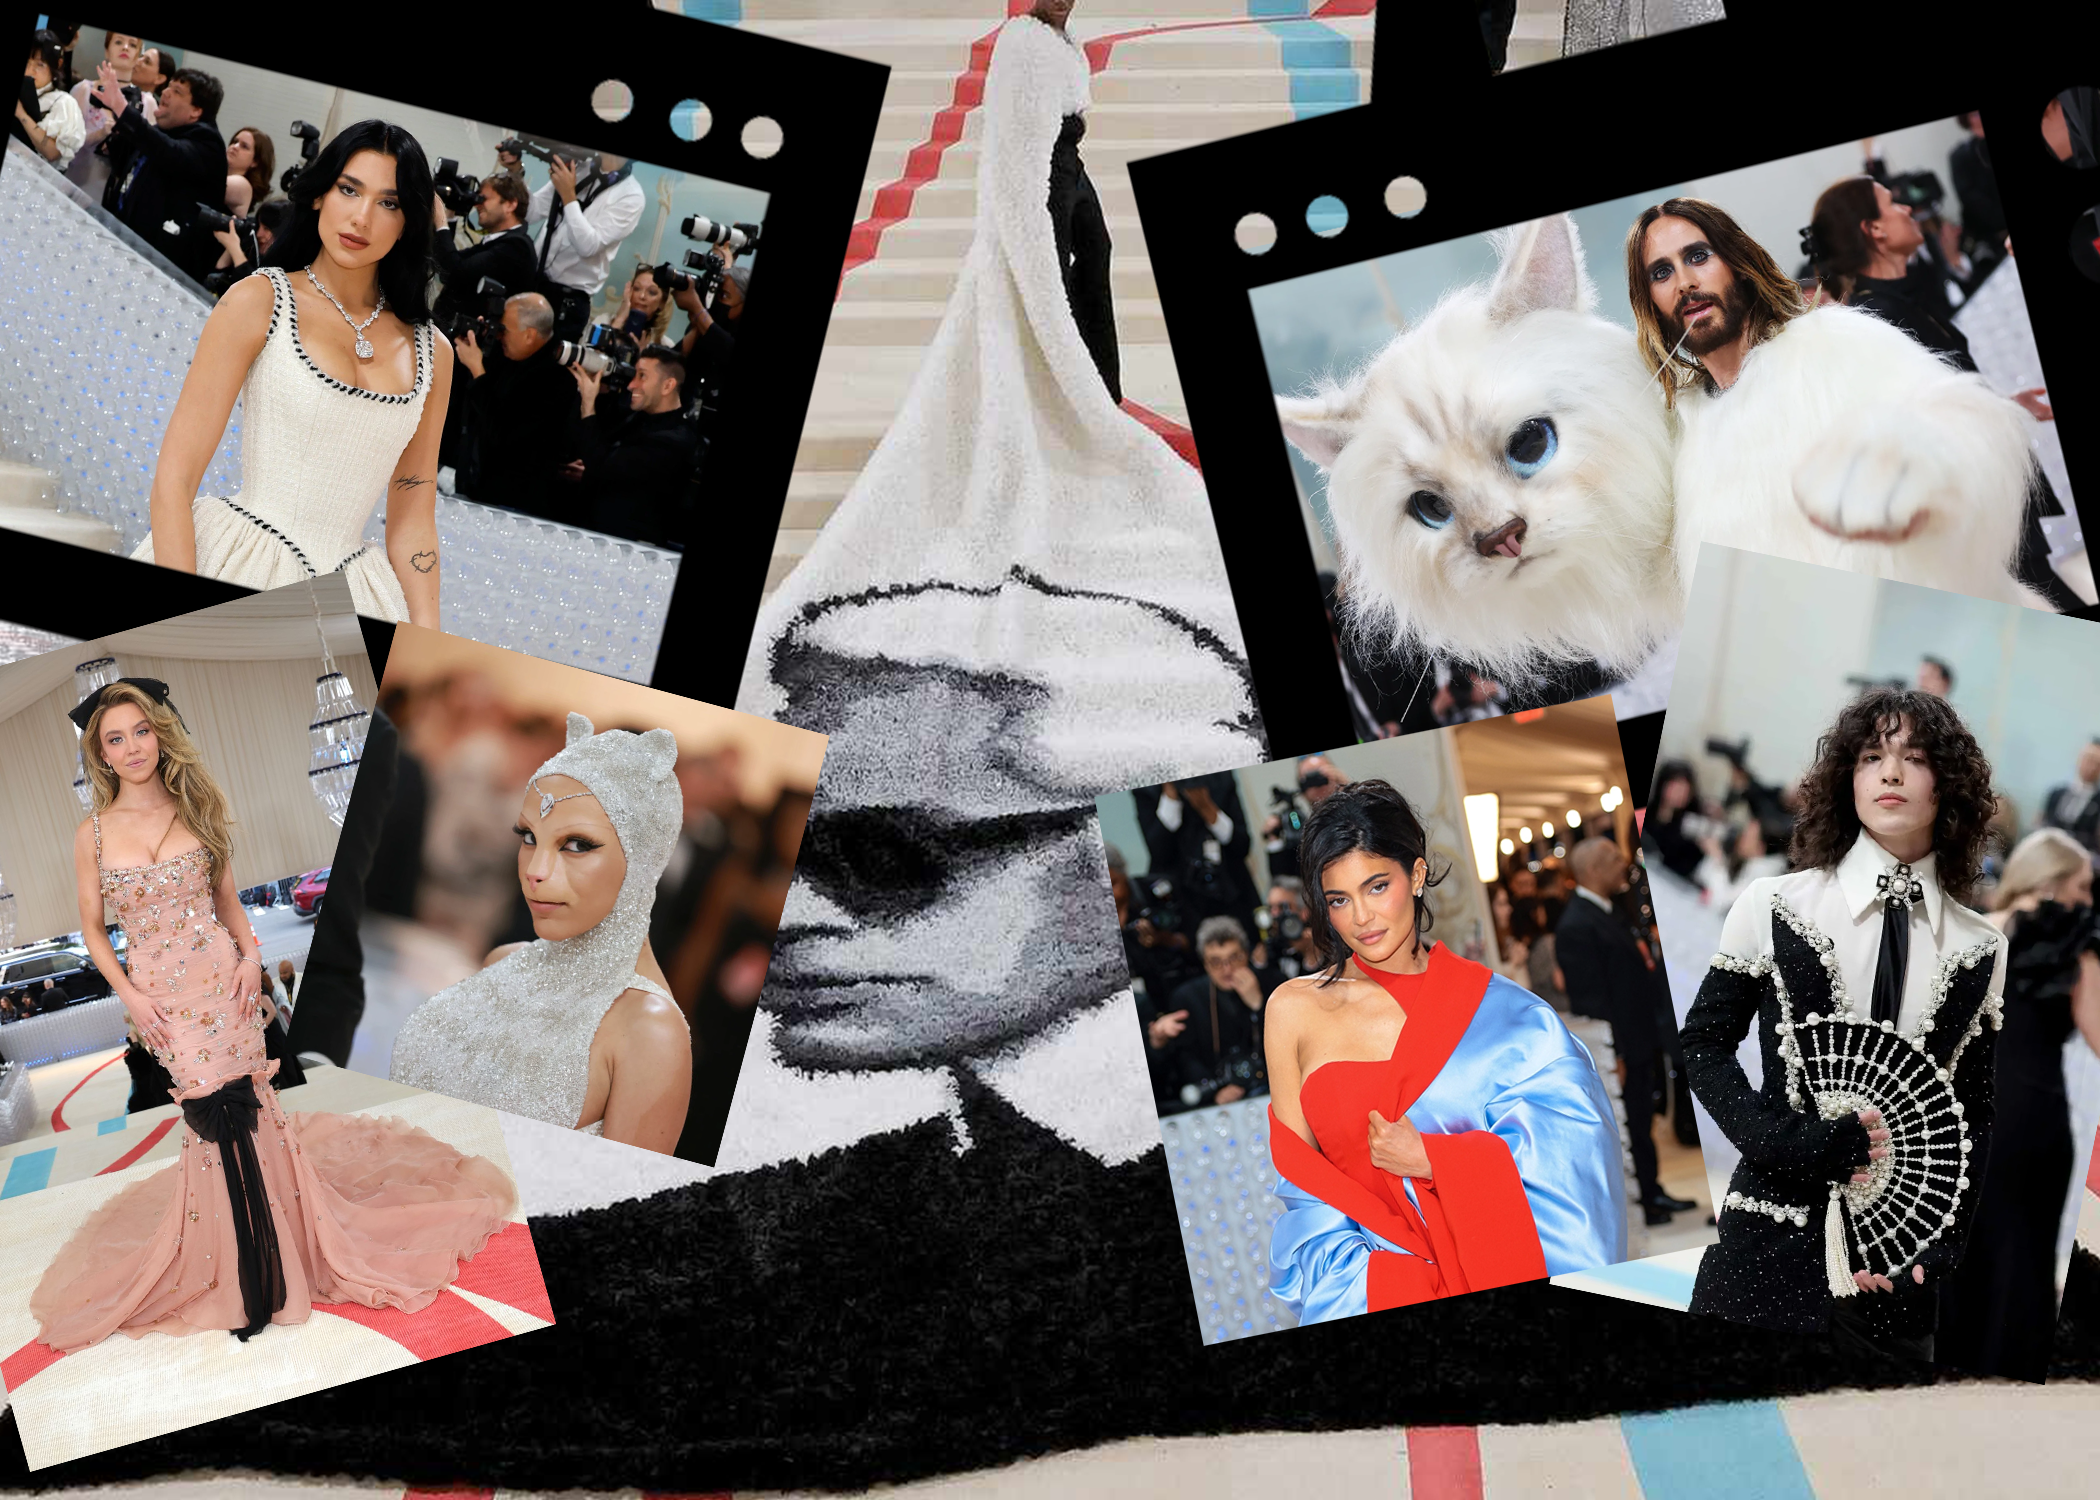 Who was Karl Lagerfeld, the designer who inspired the Met Gala 2023 theme?